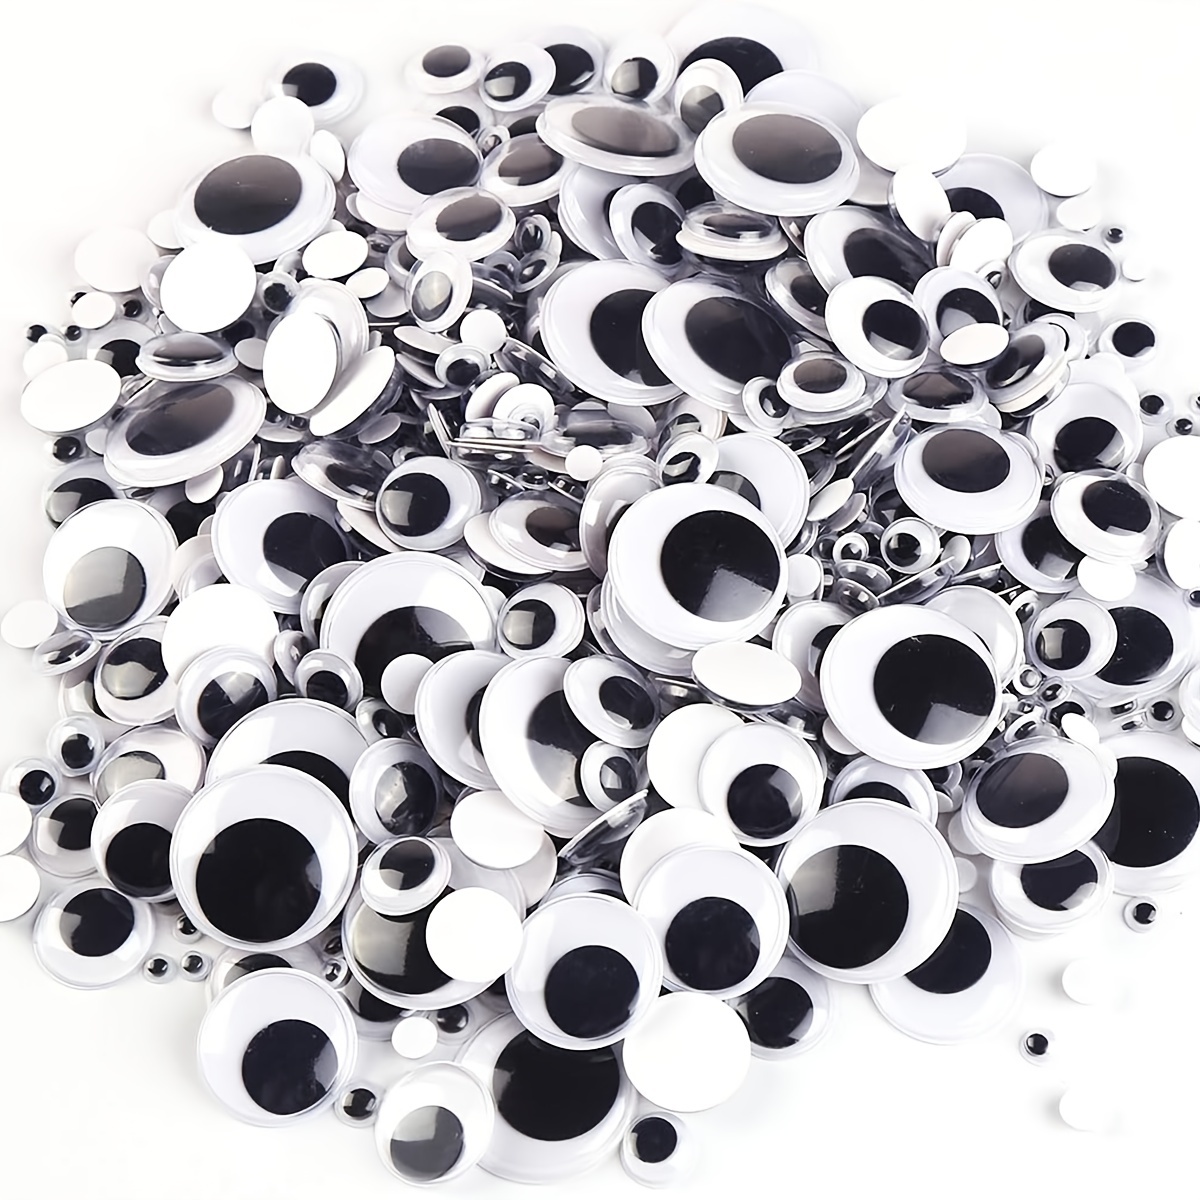 300pcs 7mm Black Wiggle Google Eyes Self Adhesive Black And White Craft  Eyes For Diy Craft Decorations, Quick & Secure Online Checkout